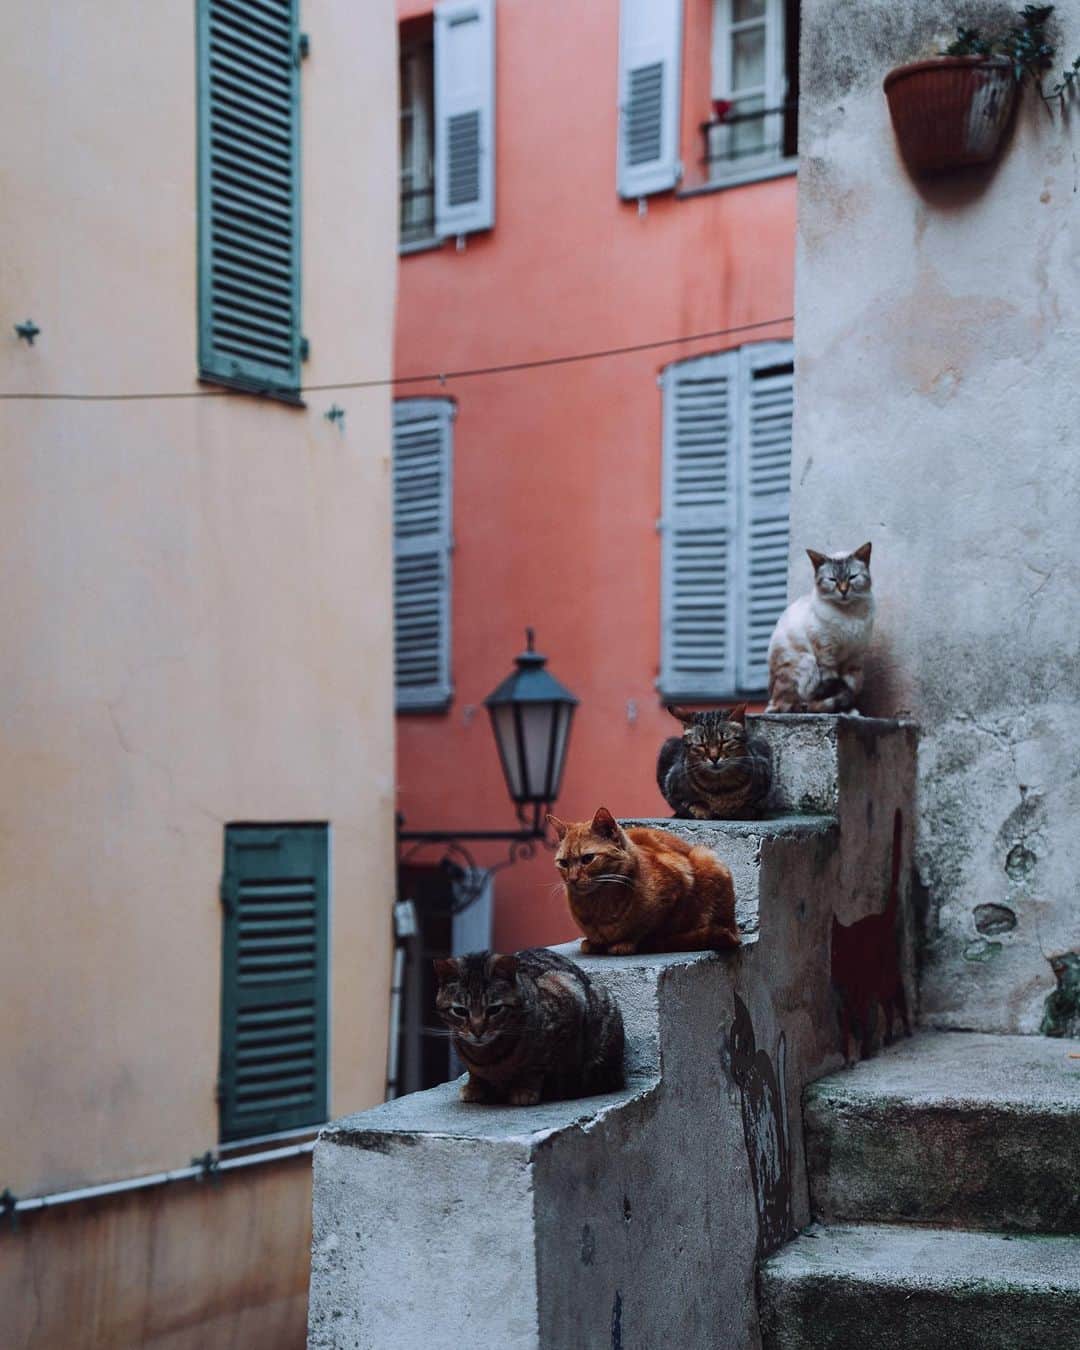 Thomas Kakarekoのインスタグラム：「While wandering the streets of Grasse, I stumbled upon this unscripted moment: four cats, simply owning their space. I teased this shot in my stories a few weeks ago and was overwhelmed by your feedback. Had to give it a permanent spot here! #grasse」